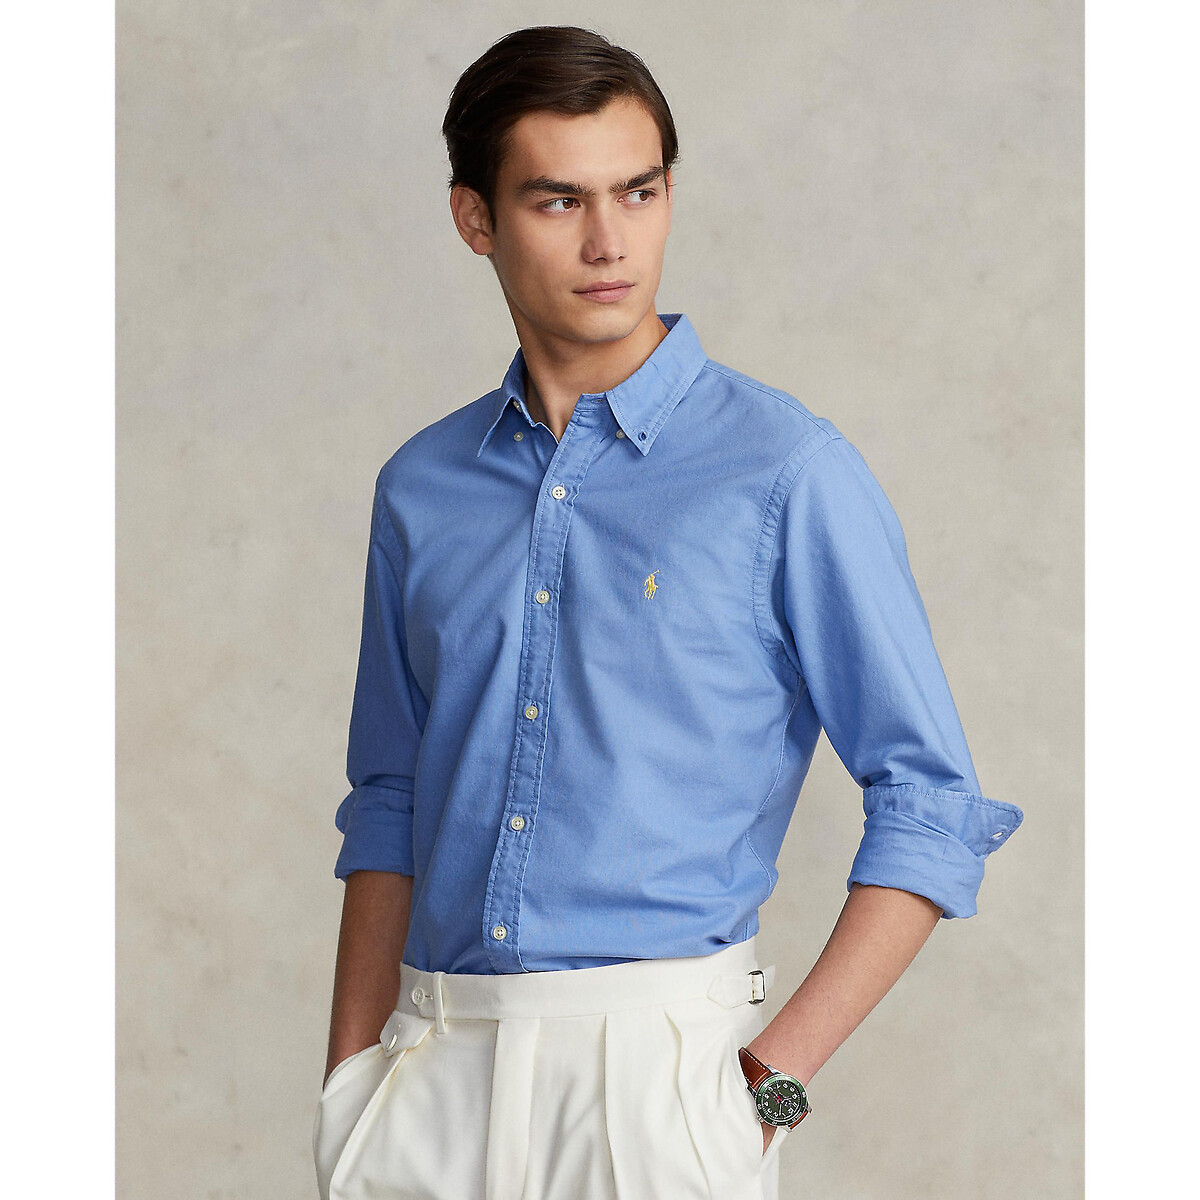 Slim Fit Shirt in Garment Dyed Oxford Cotton